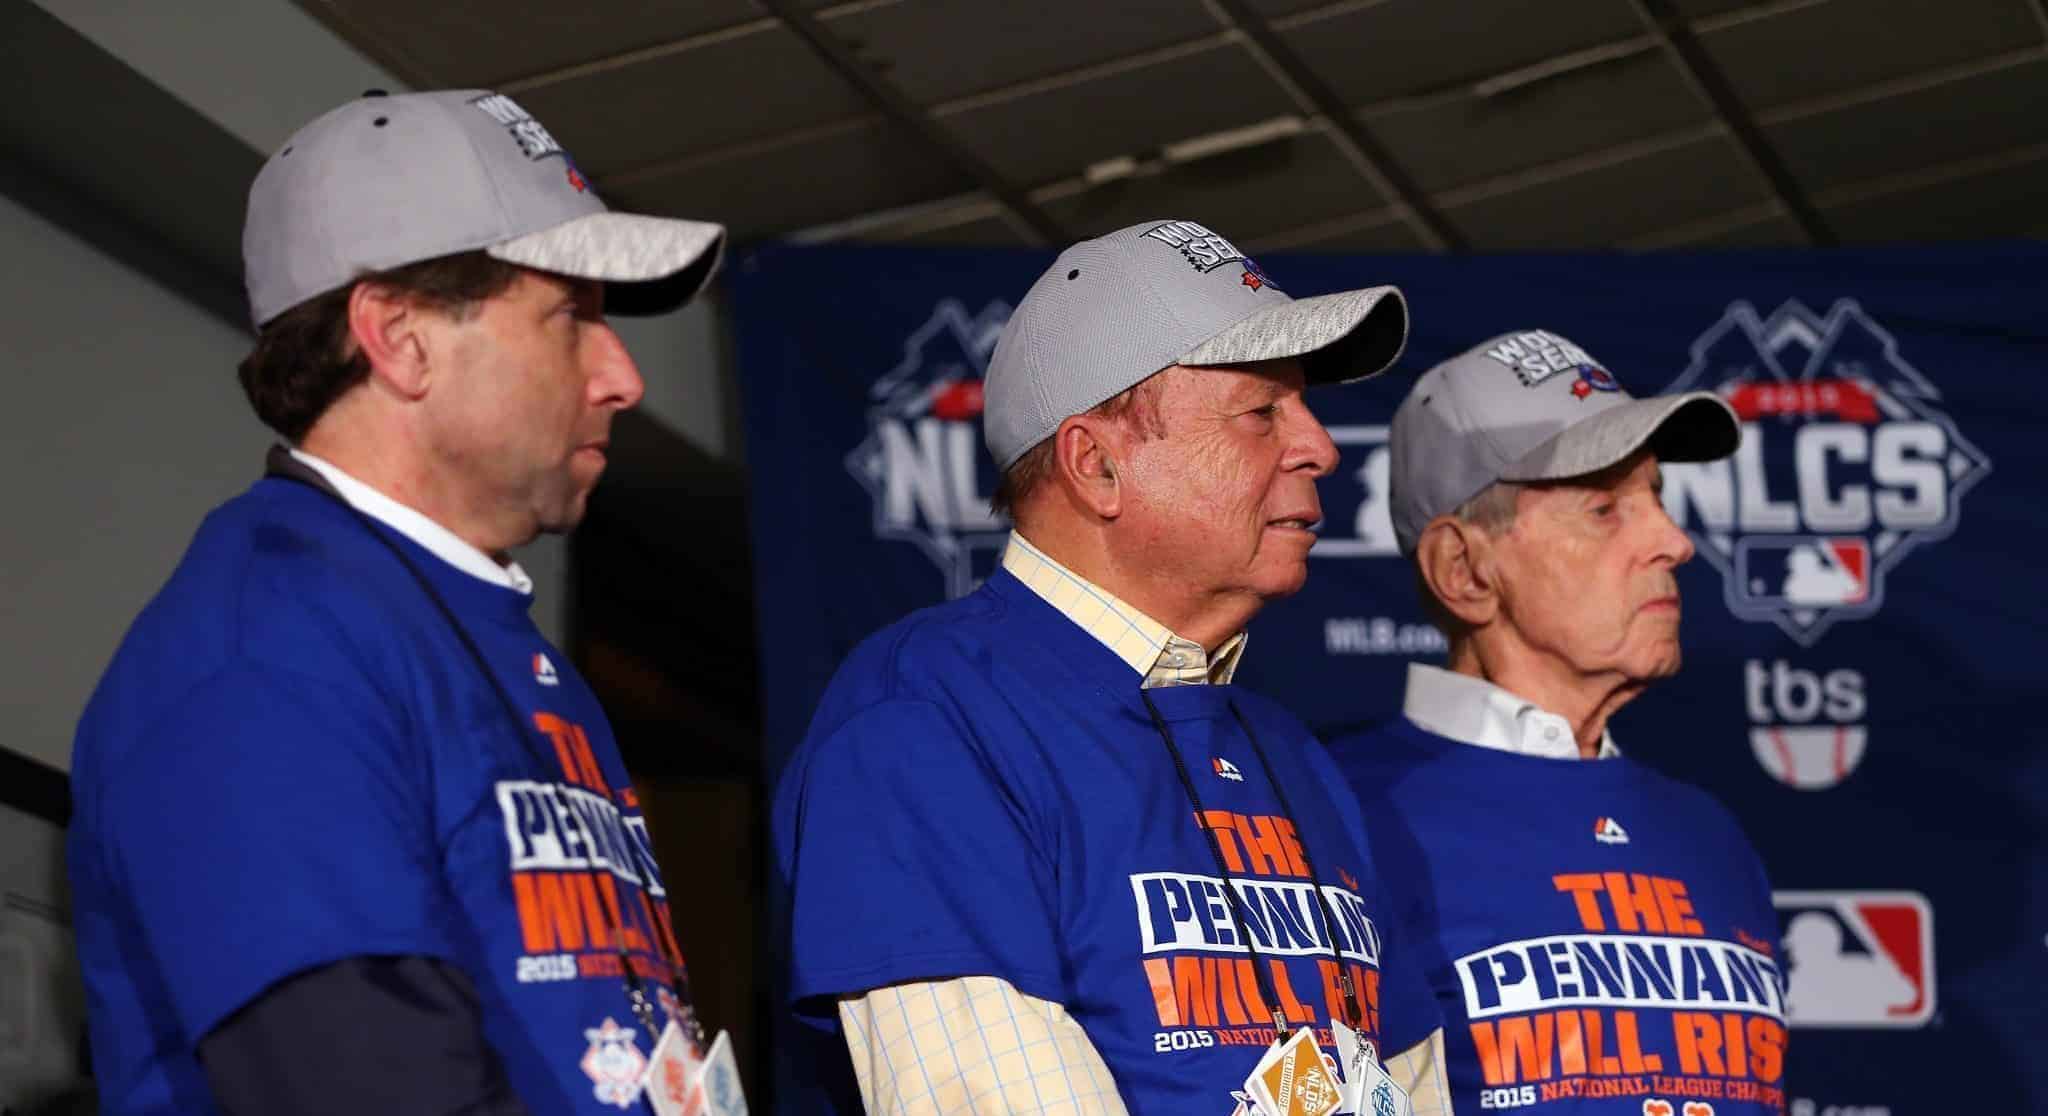 CHICAGO, IL - OCTOBER 21: (L-R) Chief Operating Officer Jeff Wilpon, Chief Executive Officer Saul Katz and Owner Fred Wilpon of the New York Mets look on after defeating the Chicago Cubs in game four of the 2015 MLB National League Championship Series at Wrigley Field on October 21, 2015 in Chicago, Illinois. The Mets defeated the Cubs with a score of 8 to 3 to sweep the Championship Series.